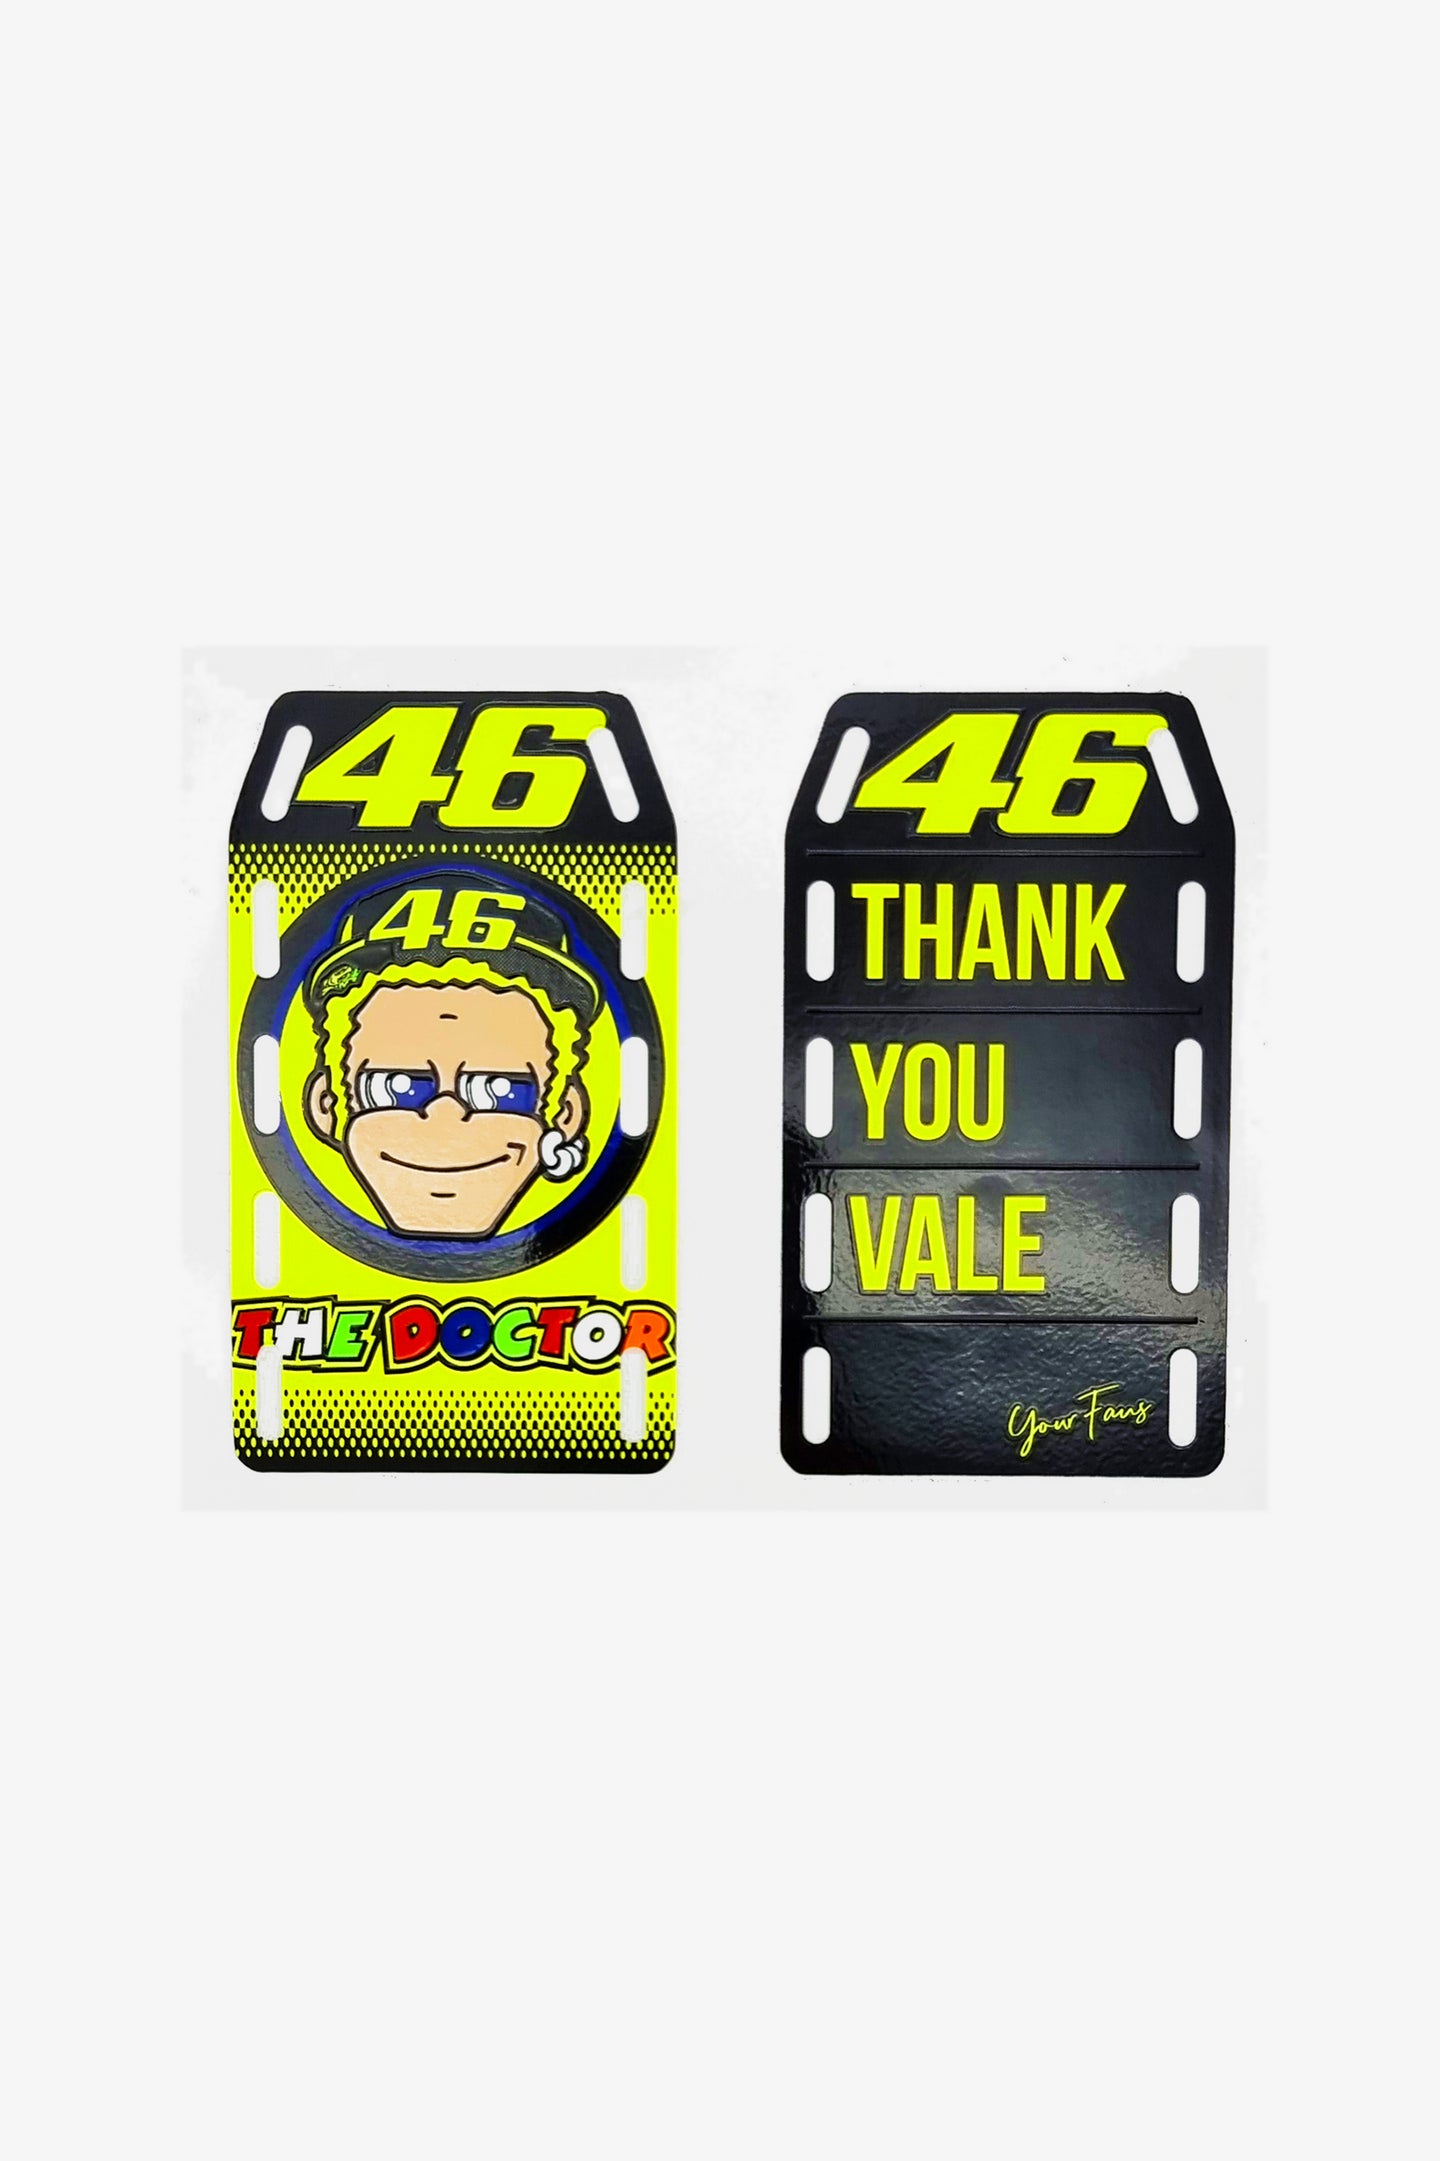 Thank you Vale stickers set